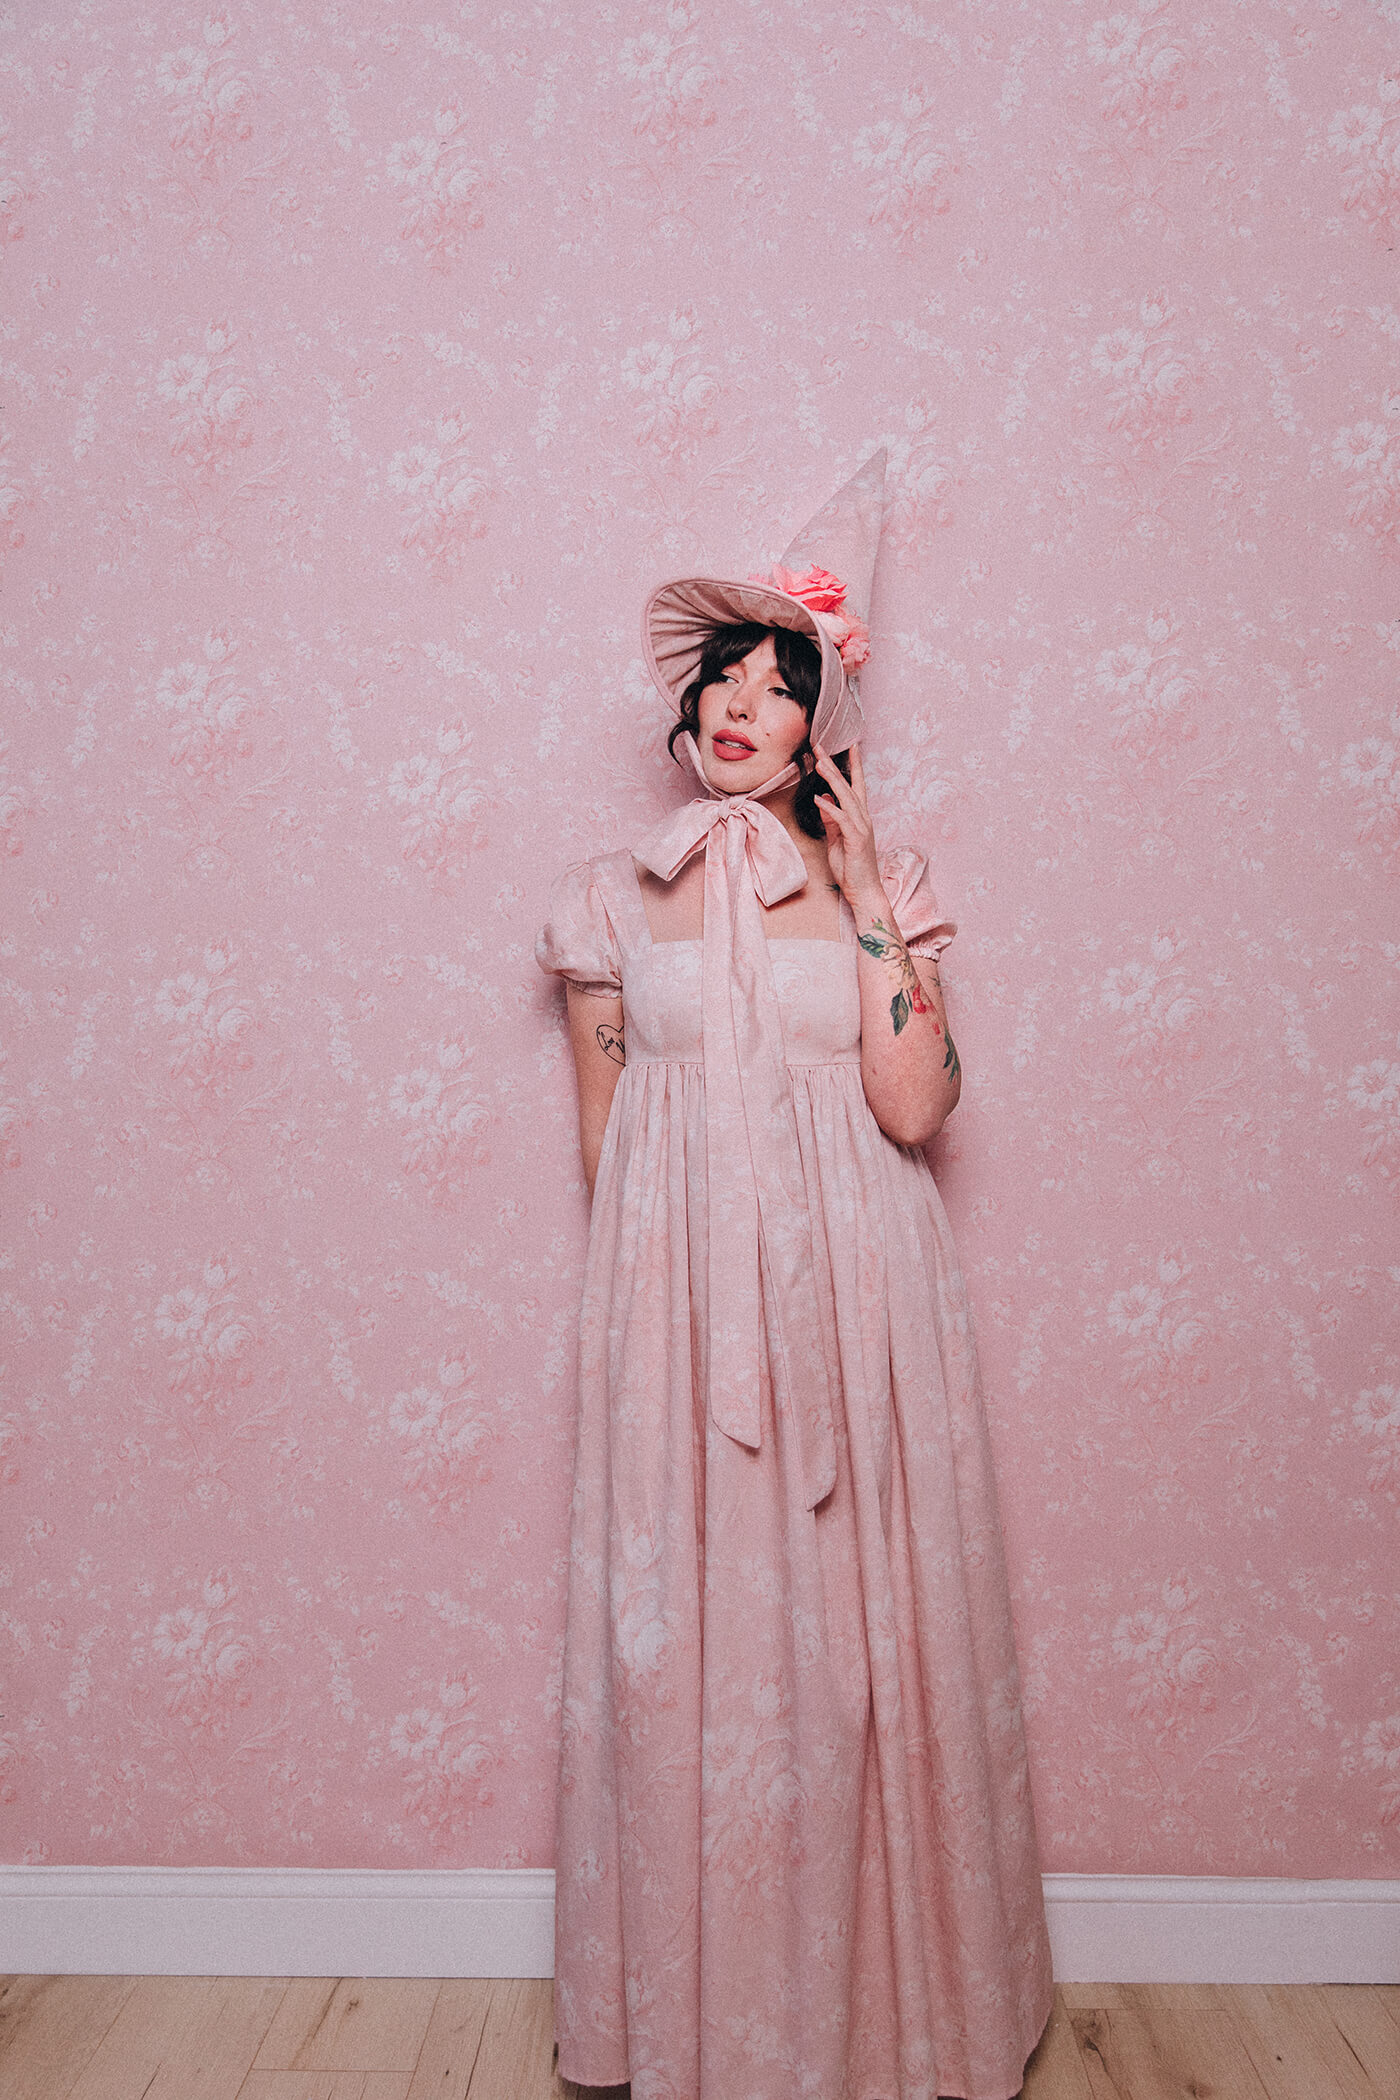 Keiko Lynn wearing a handmade dress and matching witch hat made out of Spoonflower fabric, in front of matching wallpaper in the same print.